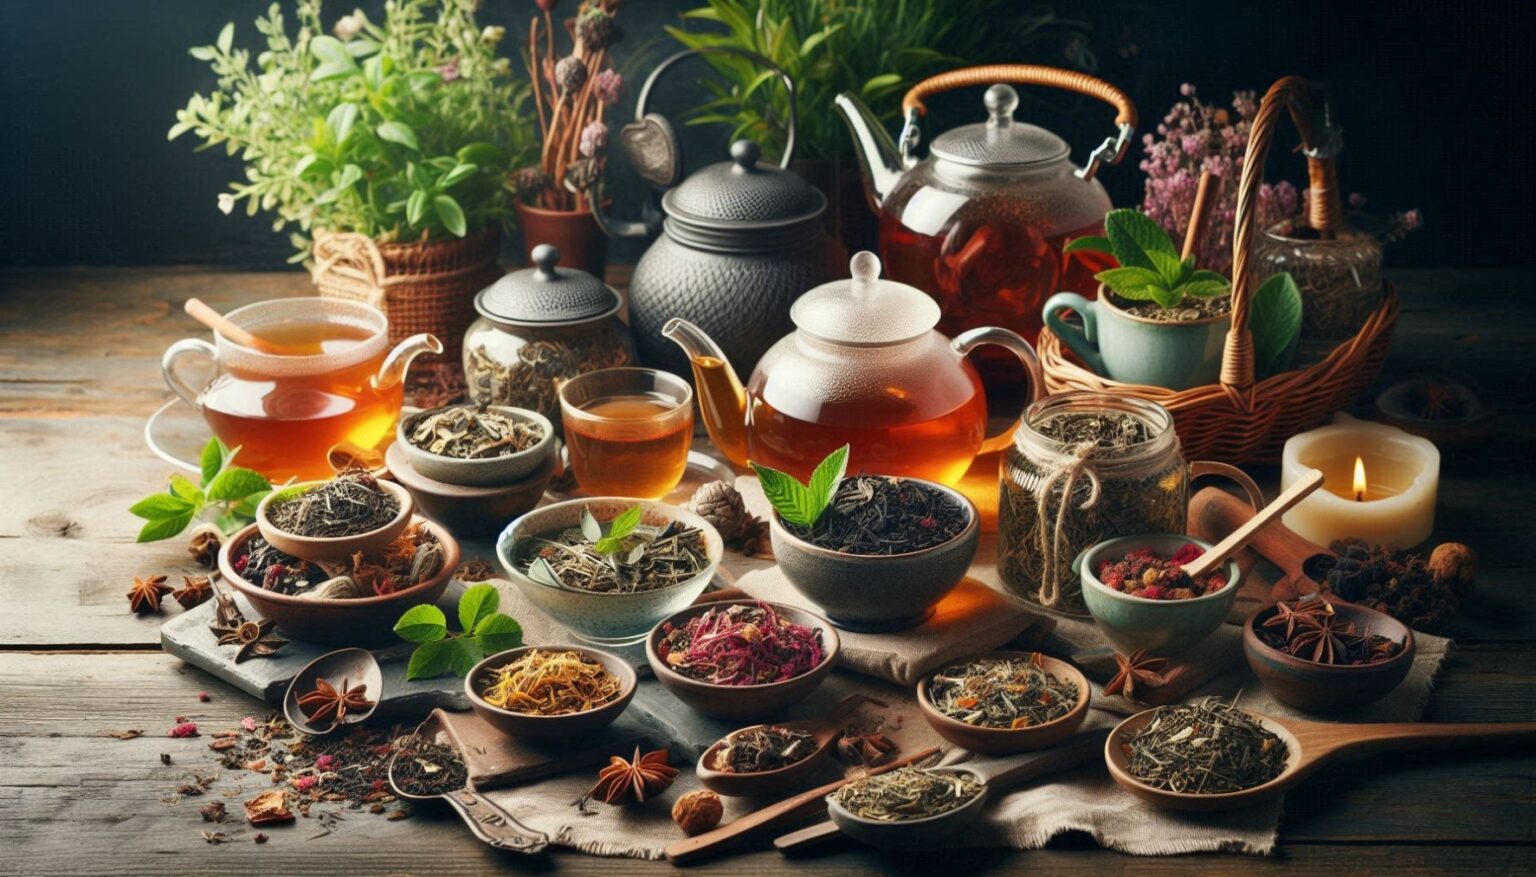 Discover the joys and benefits of brewing herbal tea with everyday kitchen tools